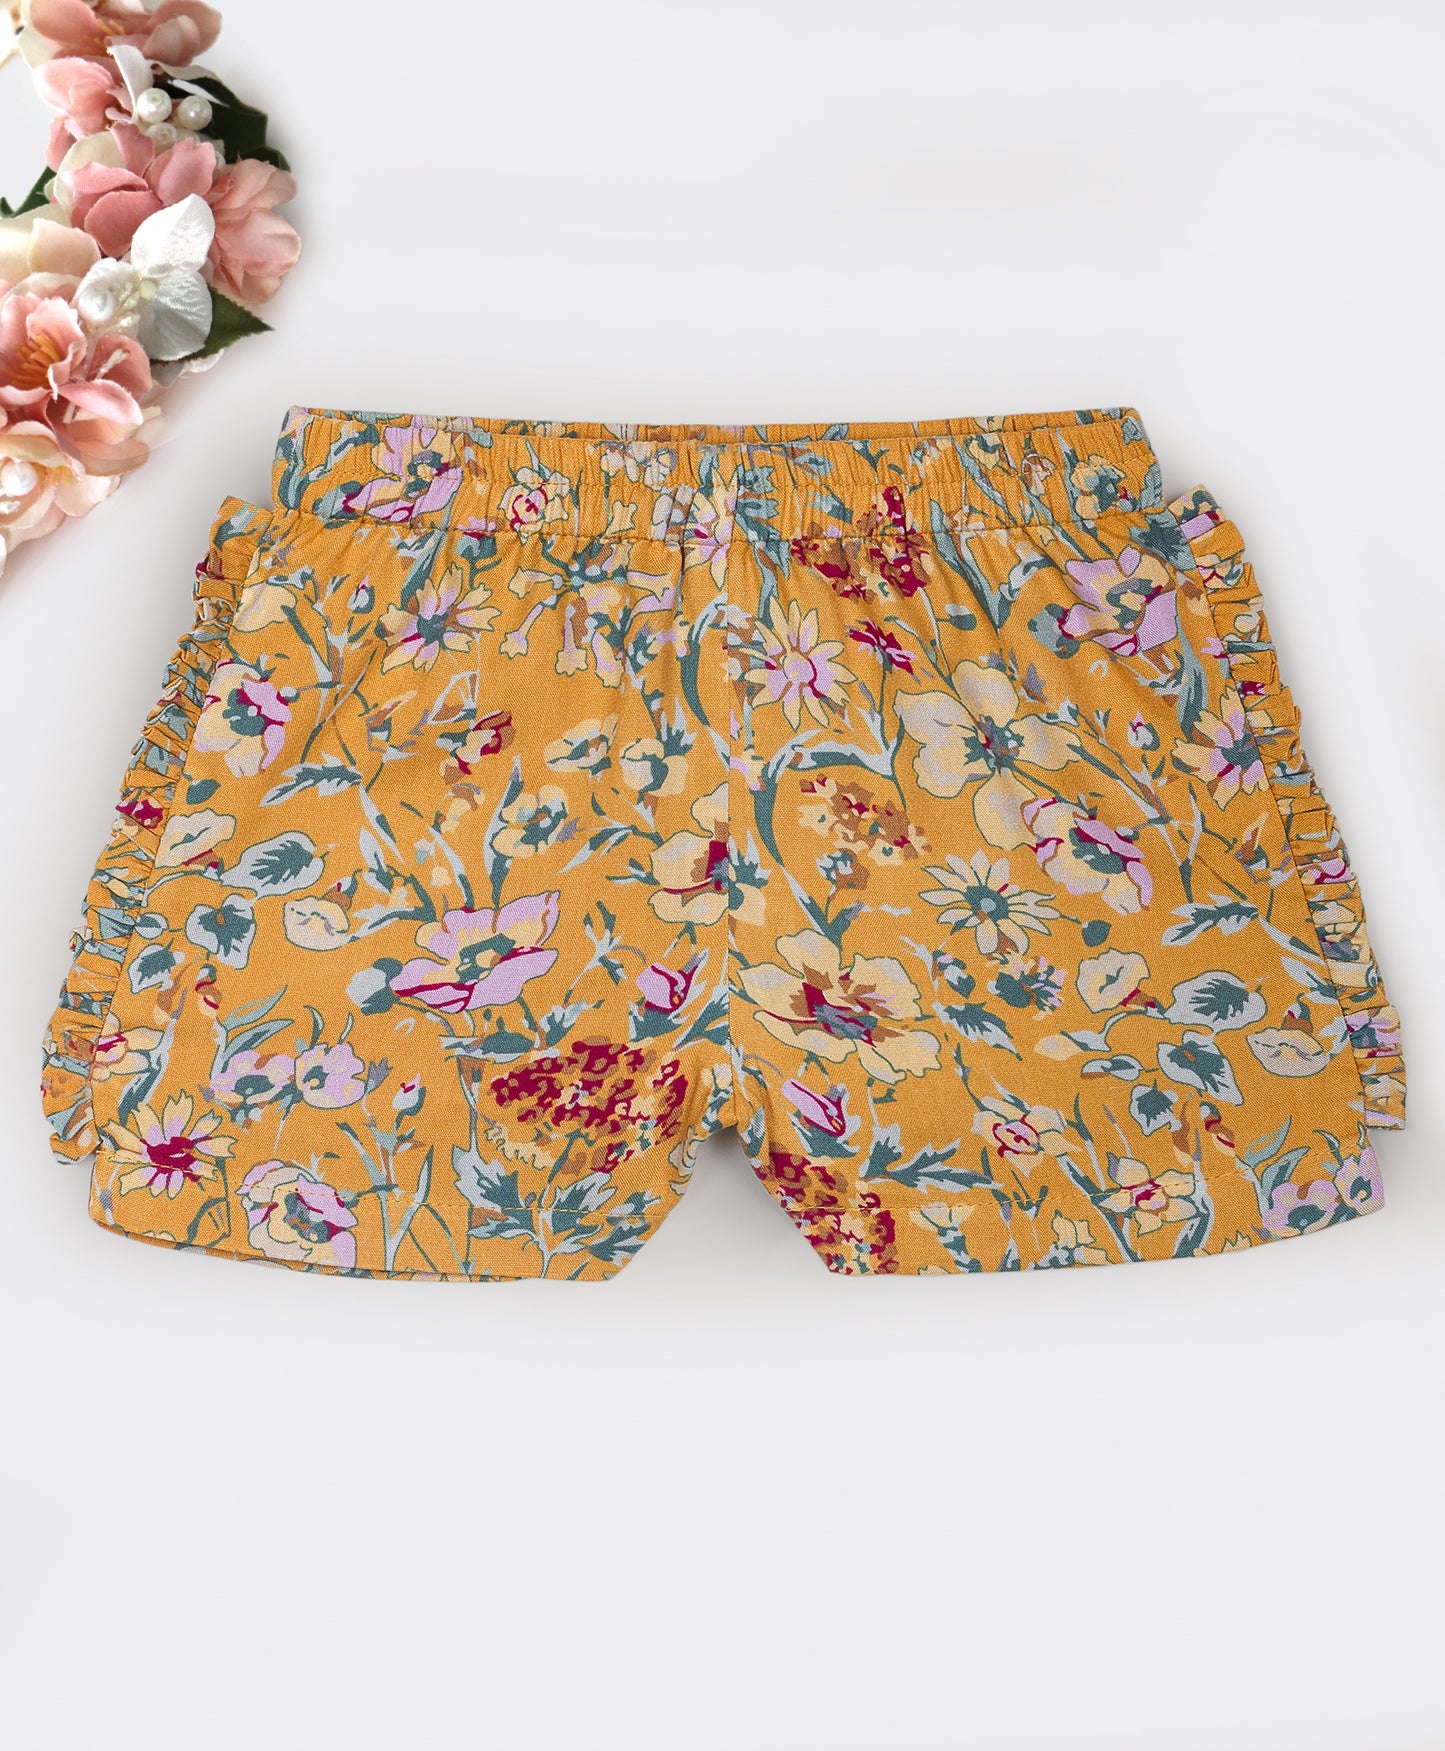 Mustard floral print shorts with ruffles on the side